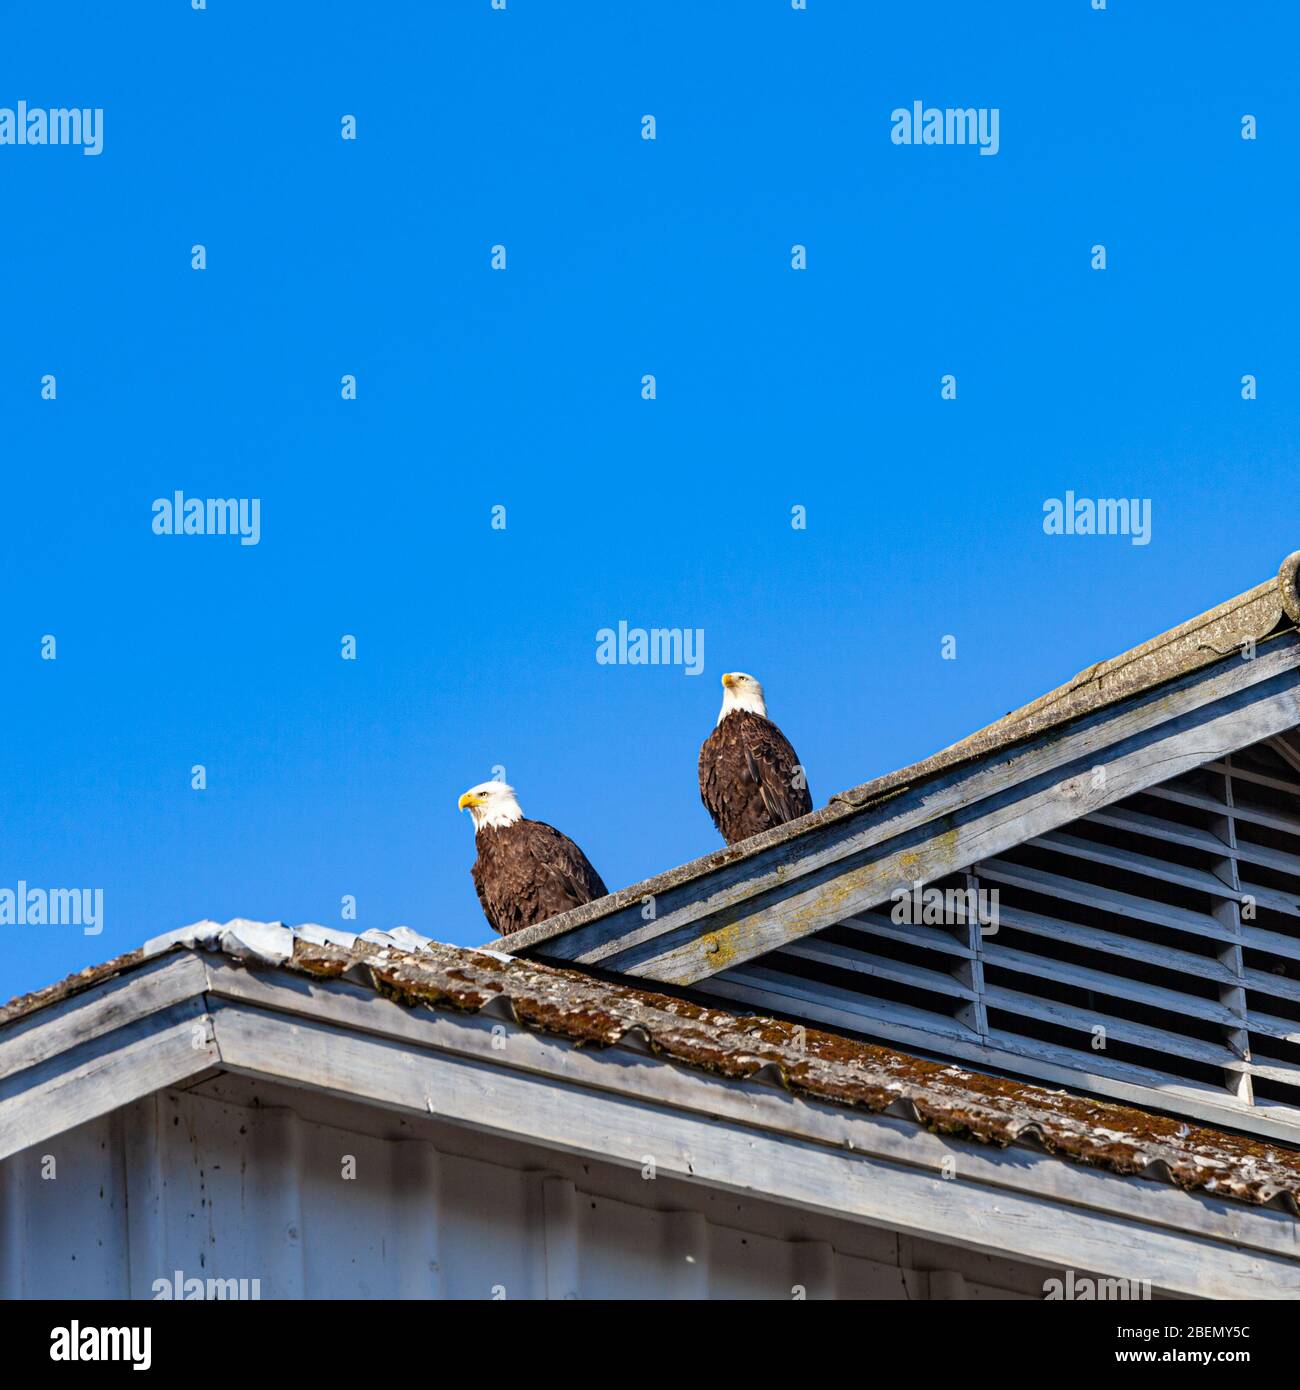 Pair of Bald Eagles on a shed roof in Steveston British Columbia Canada Stock Photo